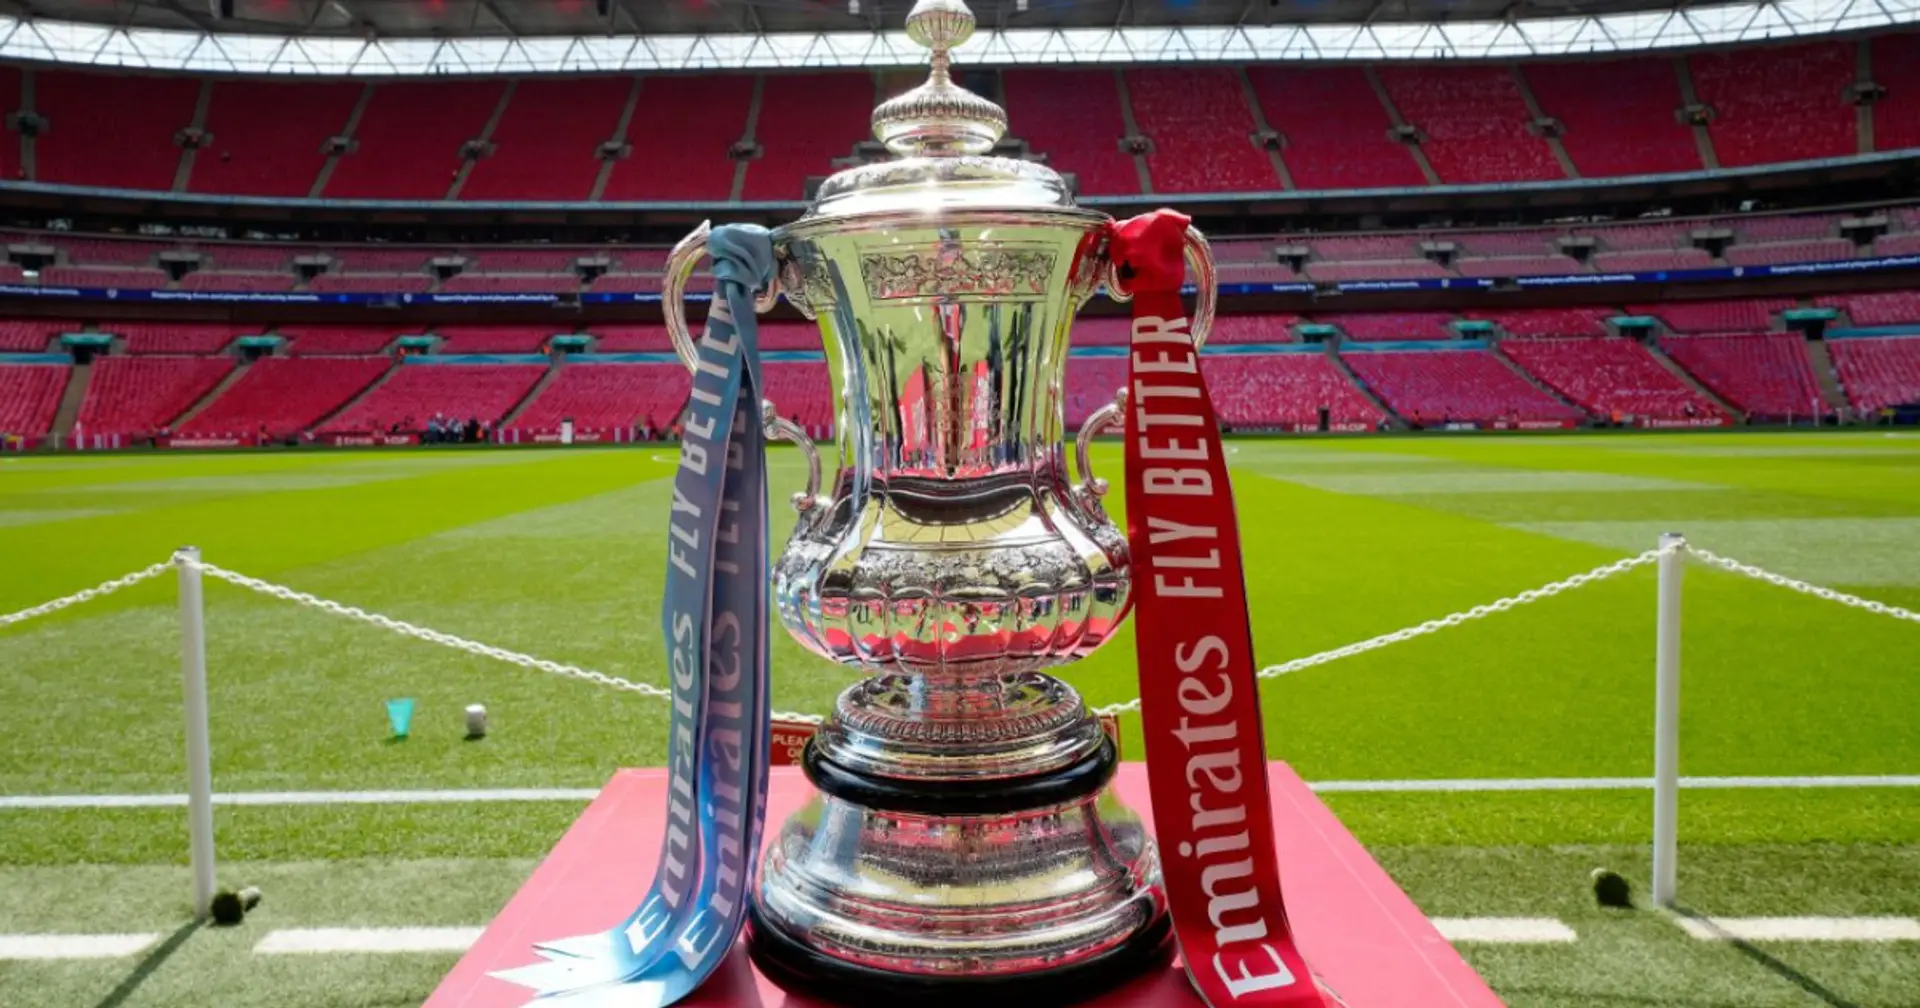 FA Cup winner odds updated after semi-final draw